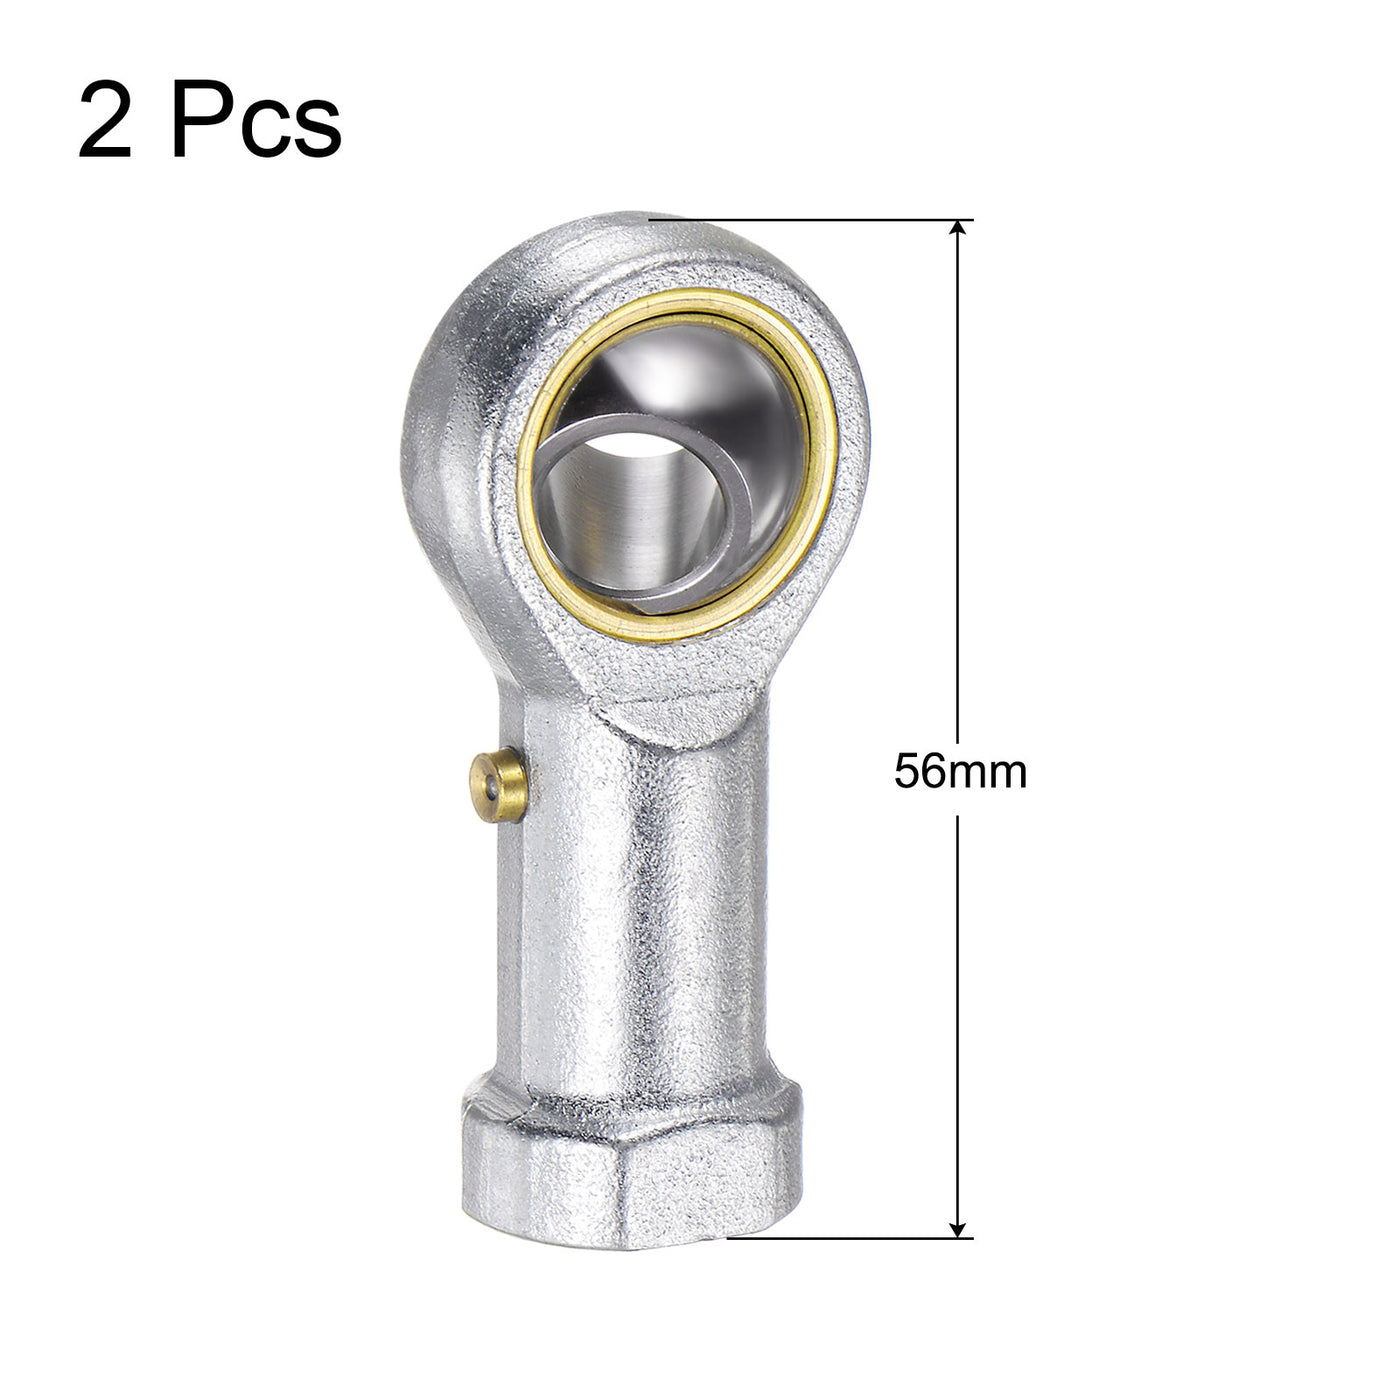 uxcell Uxcell 2pcs PHS10 M10 Female Rod End Bearing M10x1.5 Right Hand Thread,Includes Jam Nut